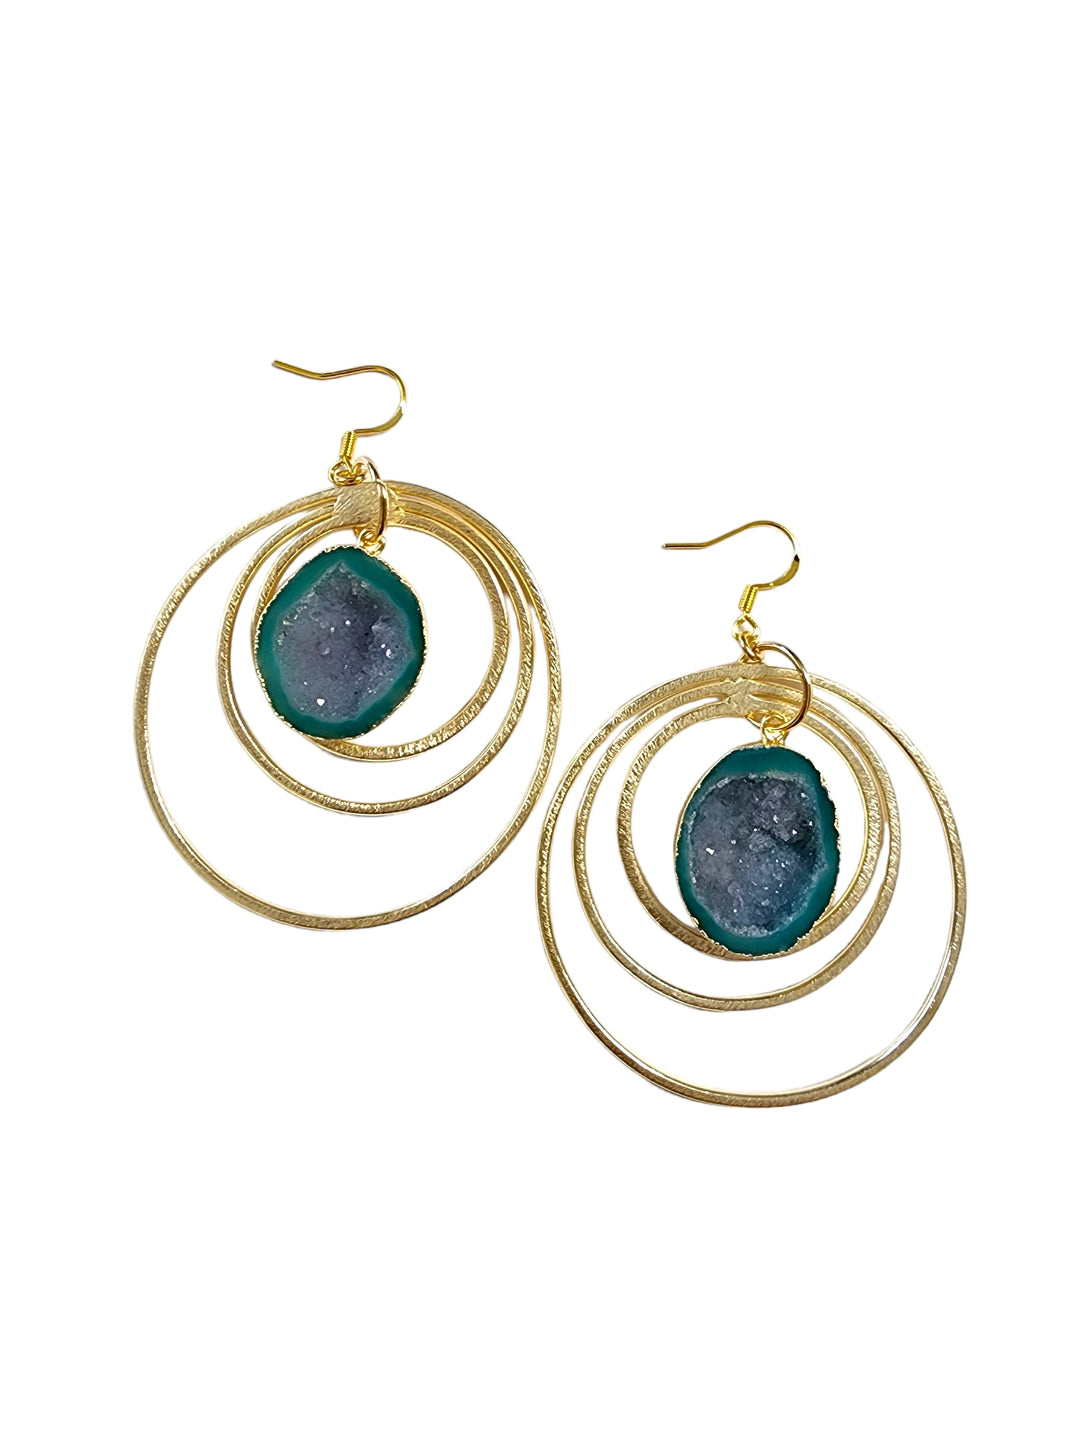 The Geode Triple Hoop Earring Collection